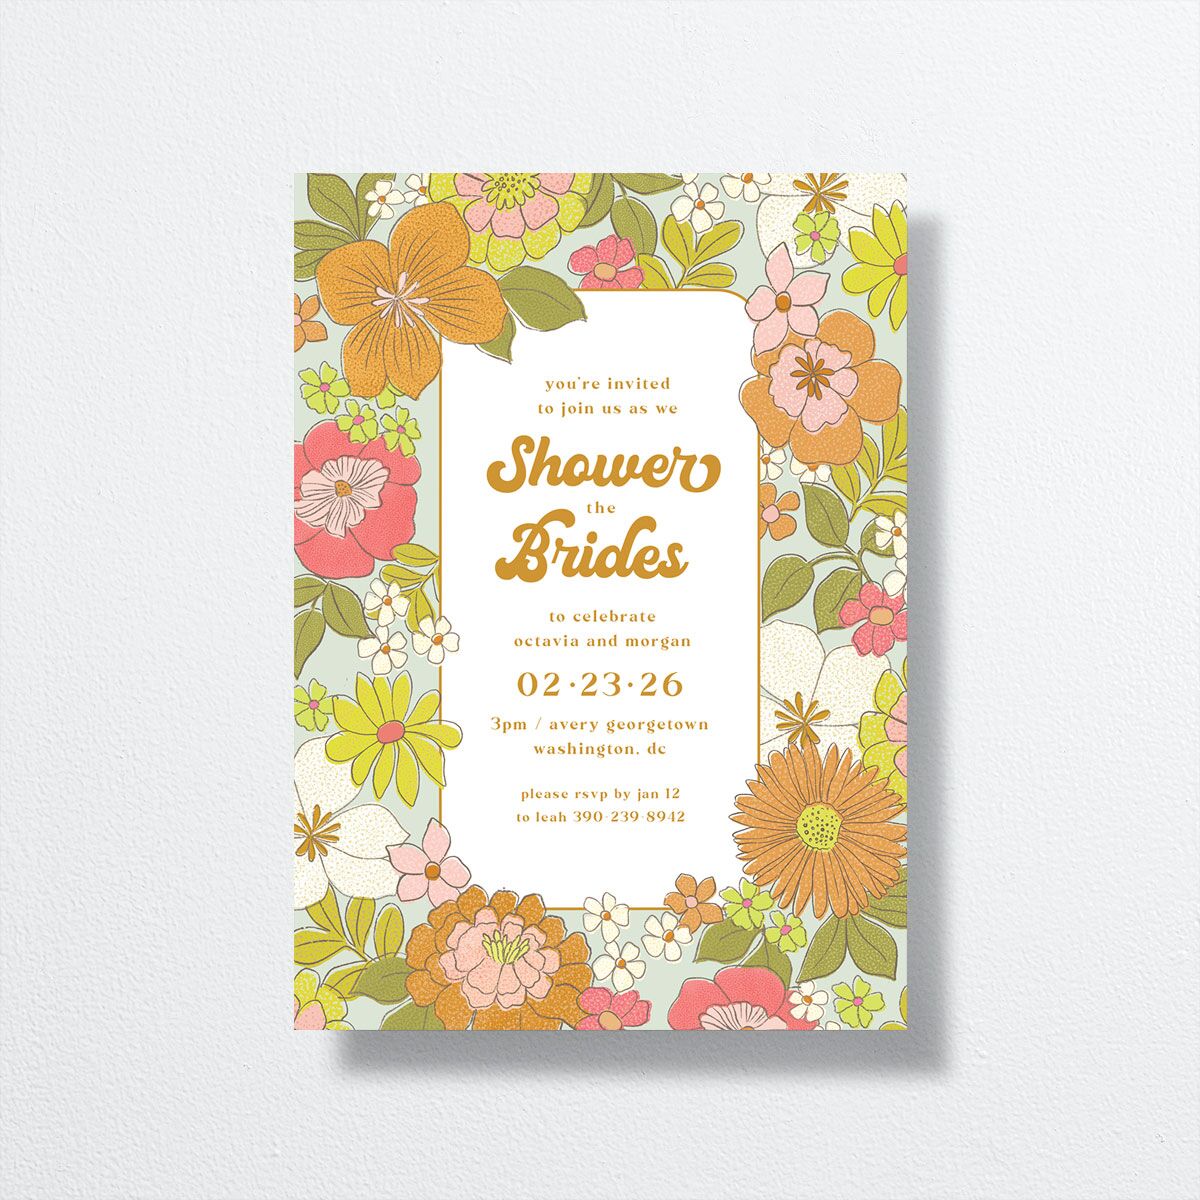 Groovy Blooms Bridal Shower Invitations front in yellow